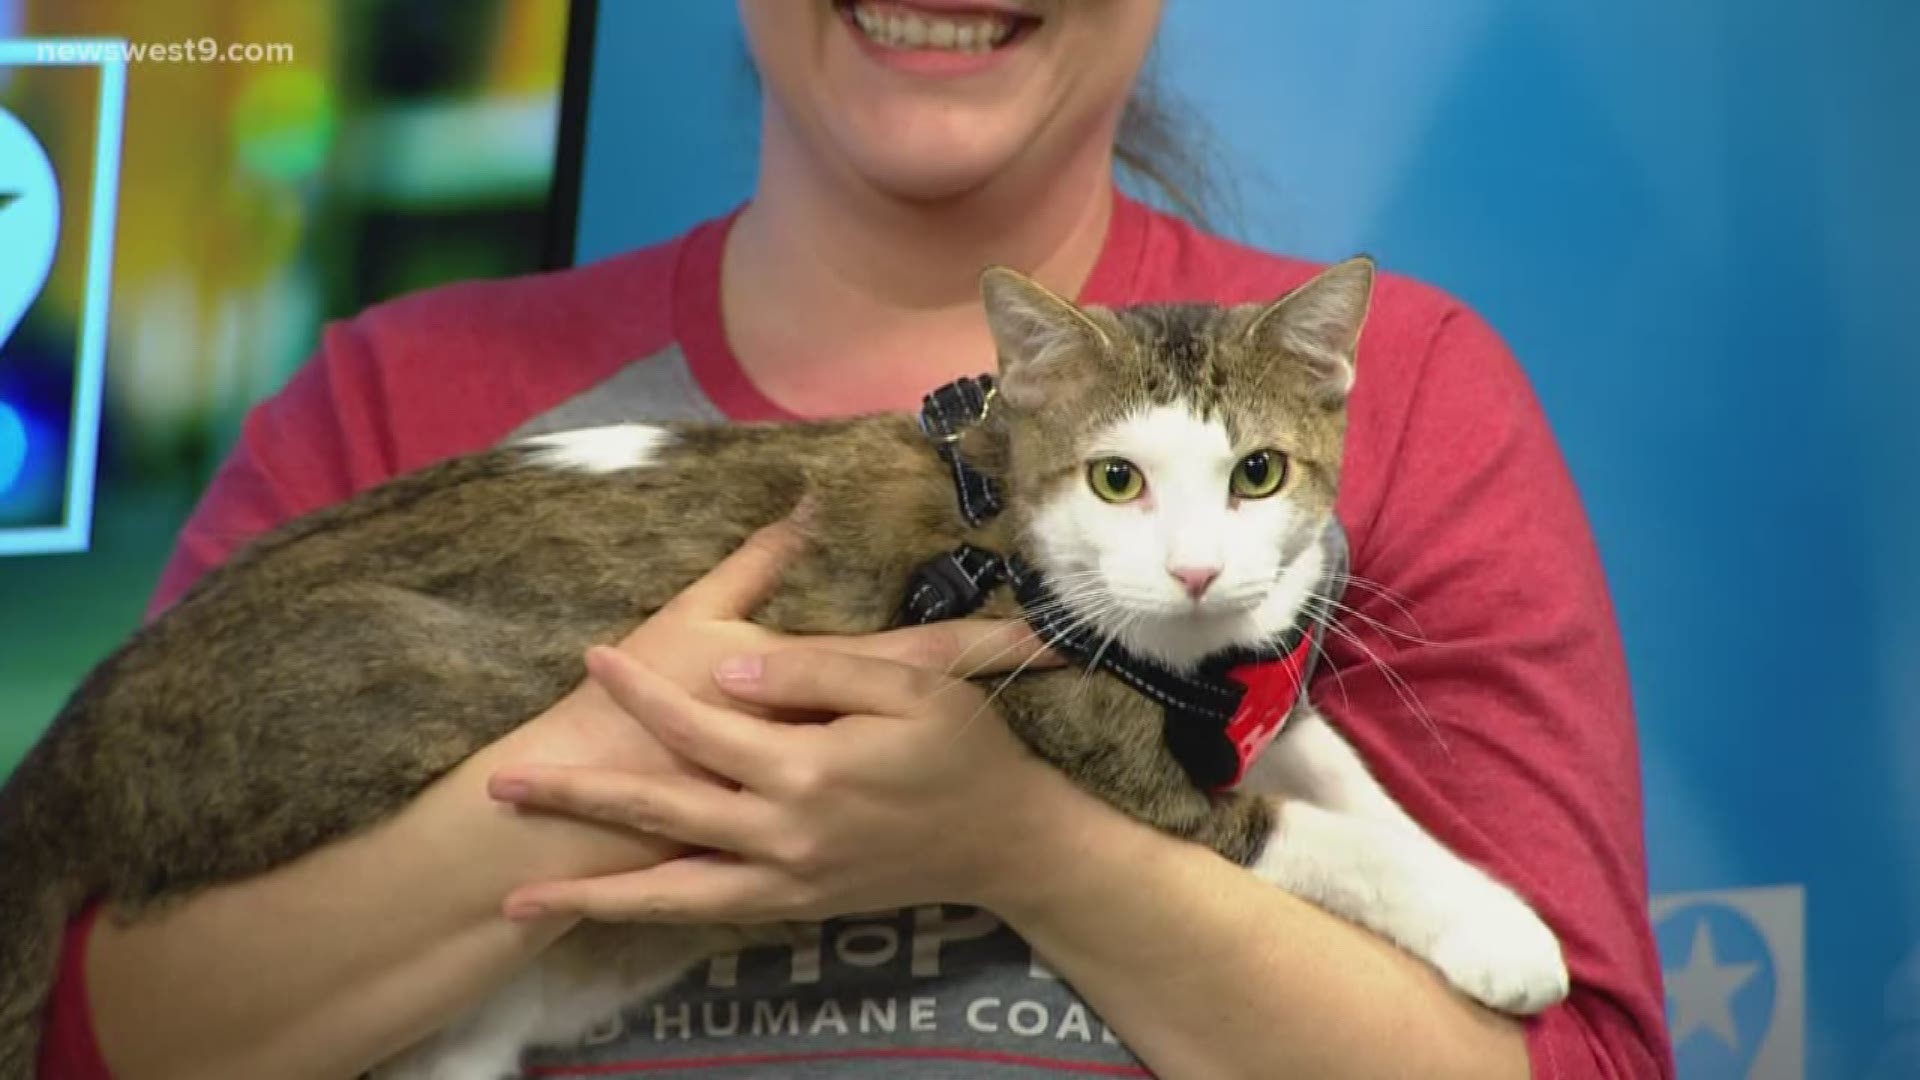 Meet Caspurr, our Pet of the Week courtesy of the Midland Humane Coalition.